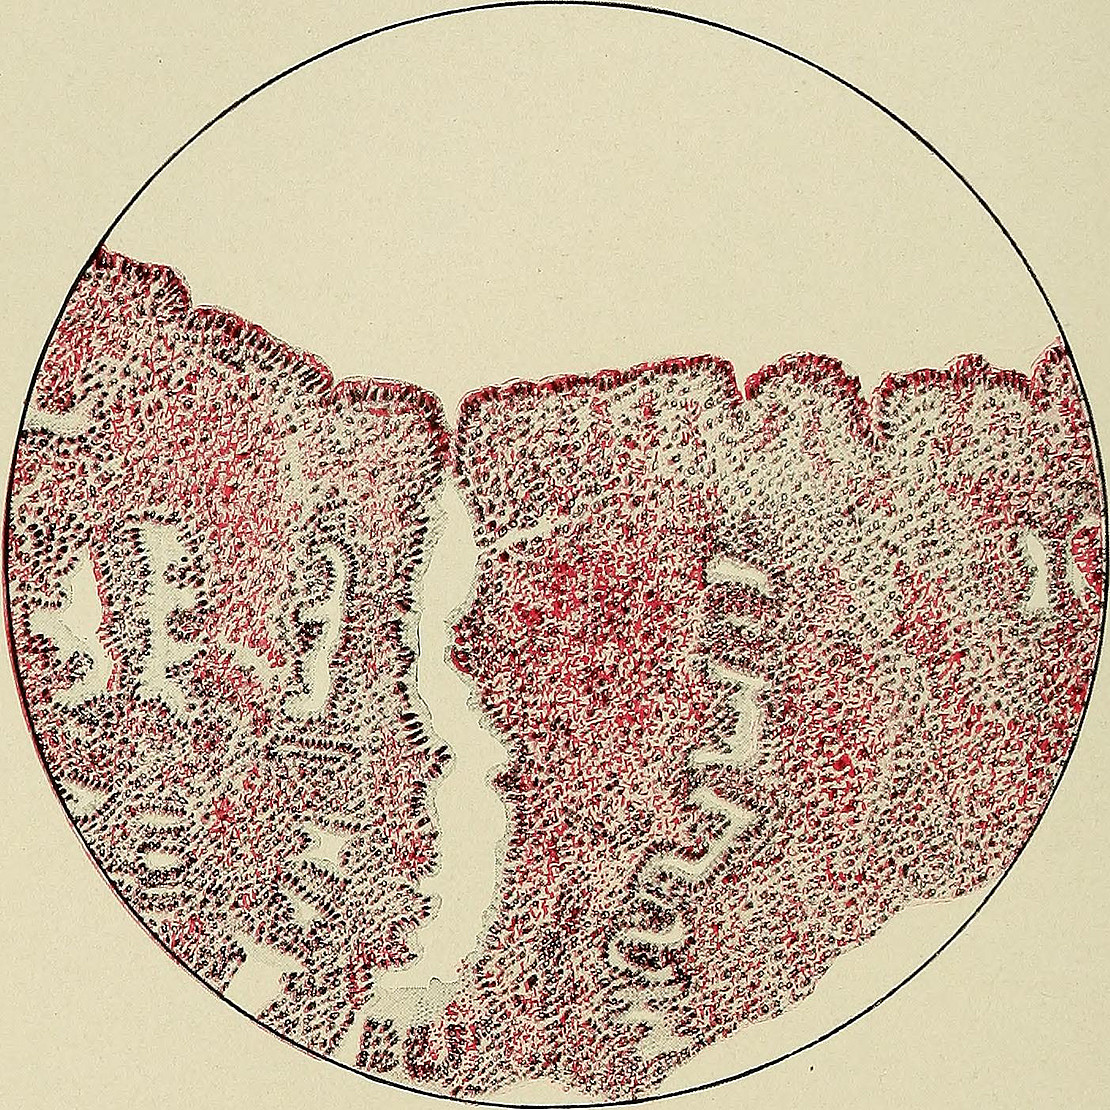 Endometrium At Beginning of Menstruation. The glands, except for the one seen in the center, have collapsed, having discharged the mate-rial which was secreted during the premenstrual stage. The blood-vessels have been eroded bythe ferment contained in the secretion, allowing the blood to exude into the tissue and on the sur-face of the endometrium. The surface epithelium in this section is still intact.